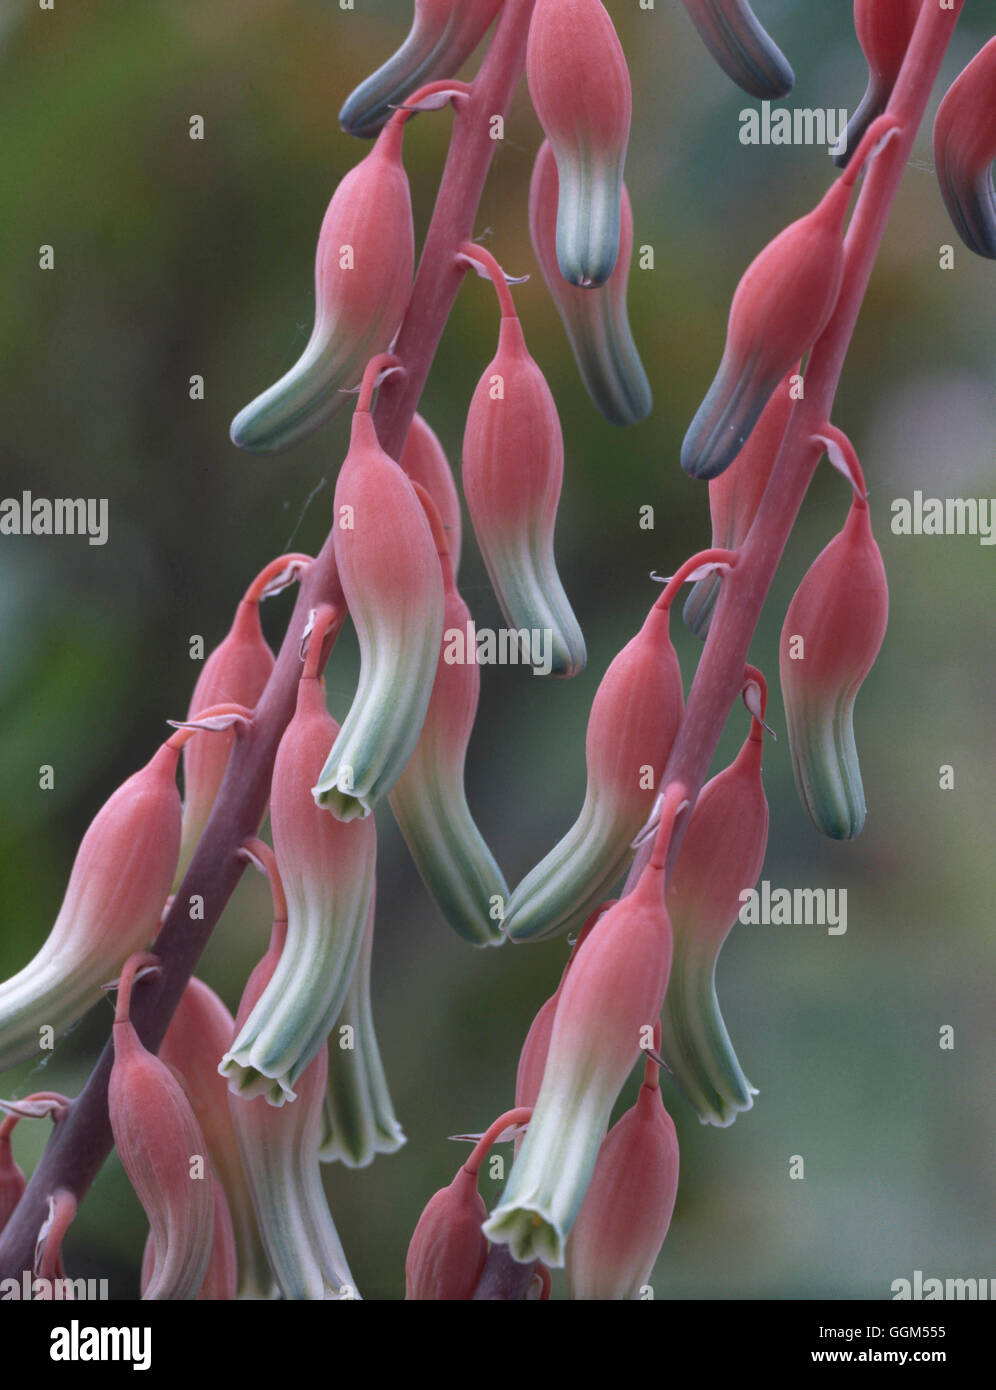 Gasteria bicolor - showing close-up of flowers   SUC069225 Stock Photo